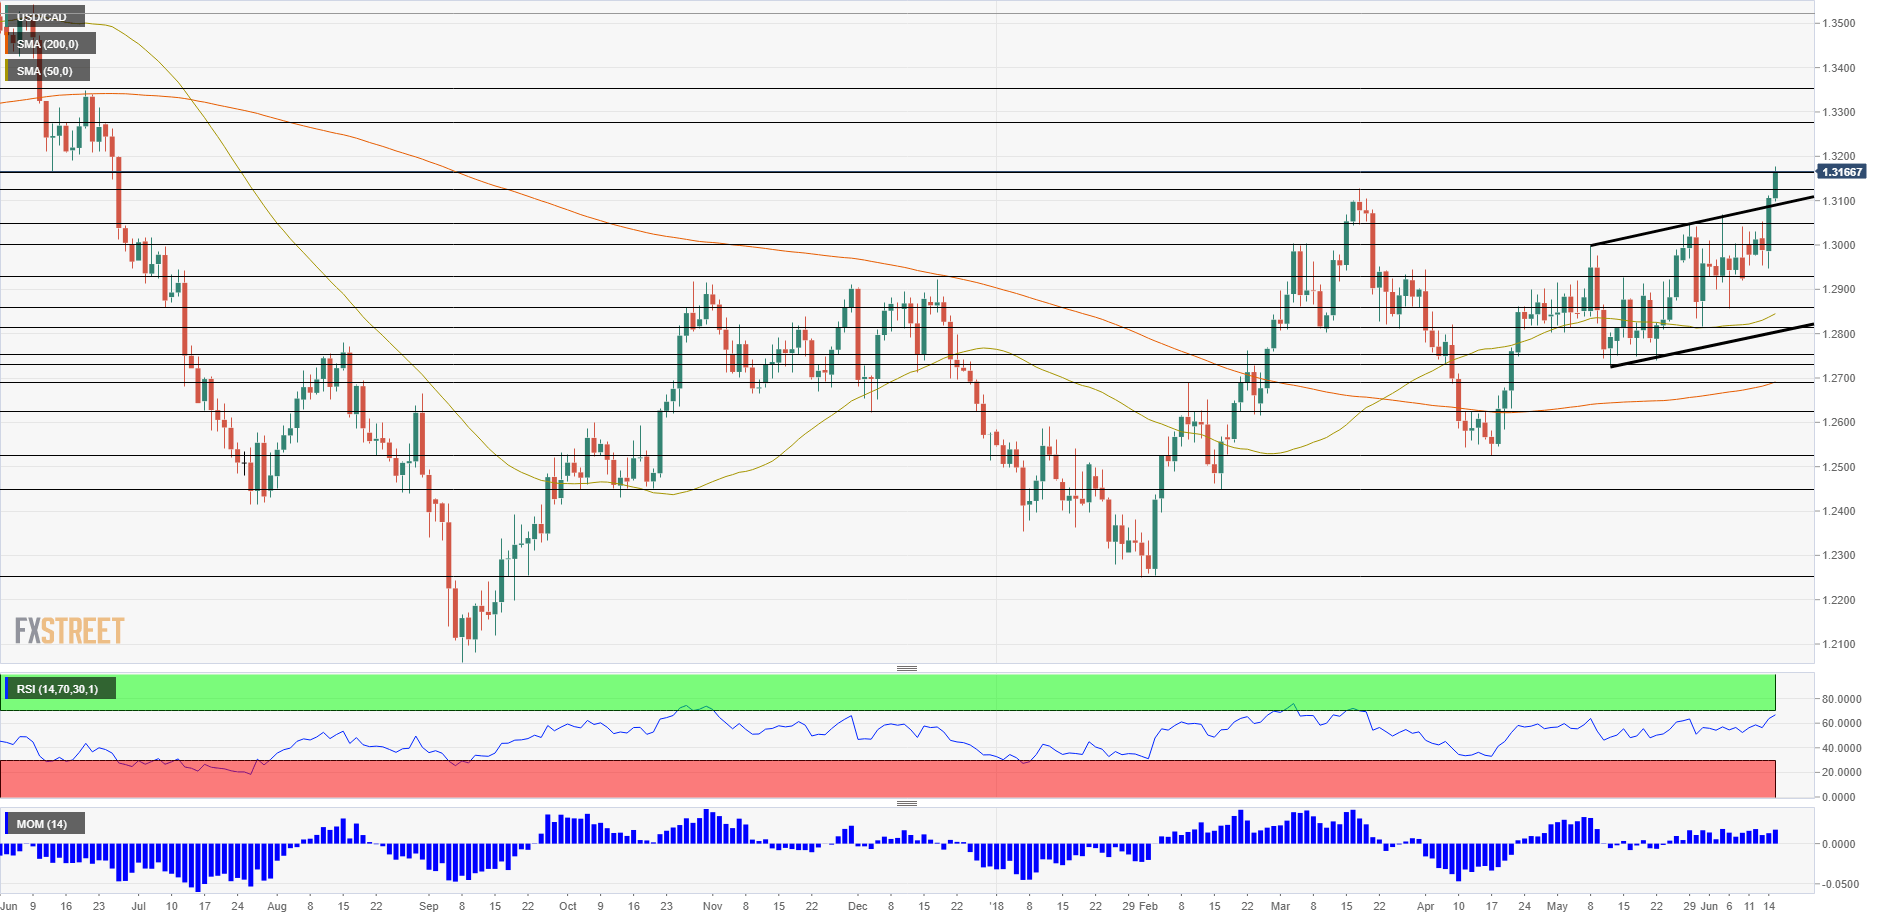 USD CAD technical analysis June 18 22 2018